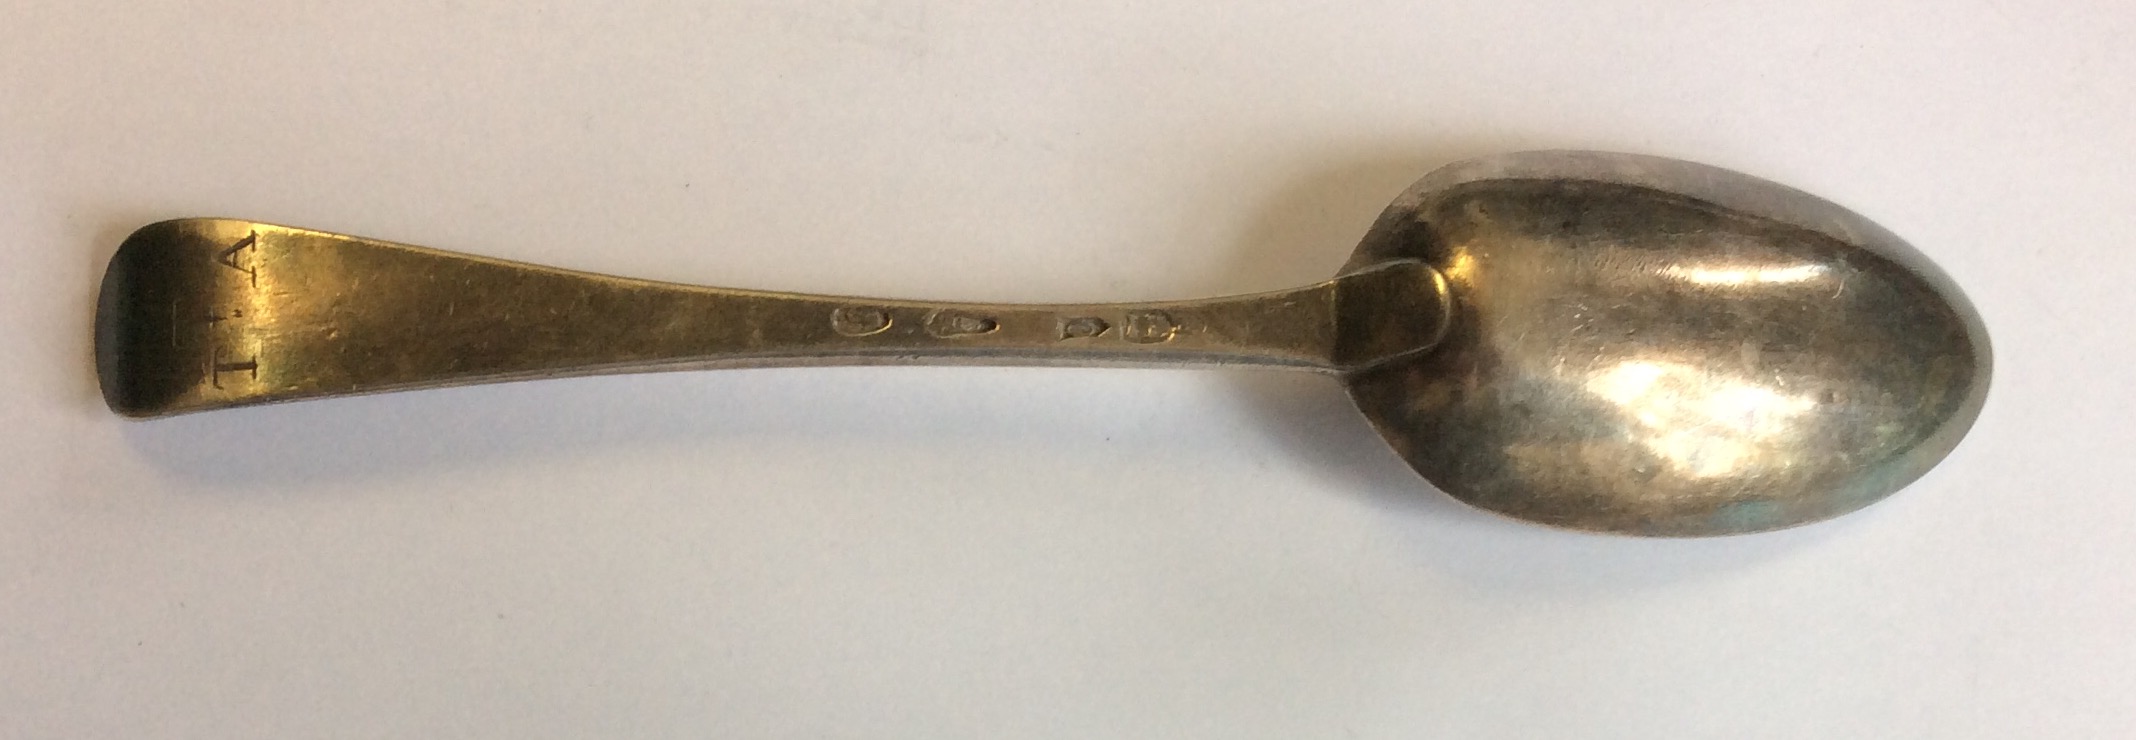 AN EARLY 19TH CENTURY IRISH SILVER SERVING SPOON Fiddle pattern, initialled 'TTA' to rear, - Image 2 of 2